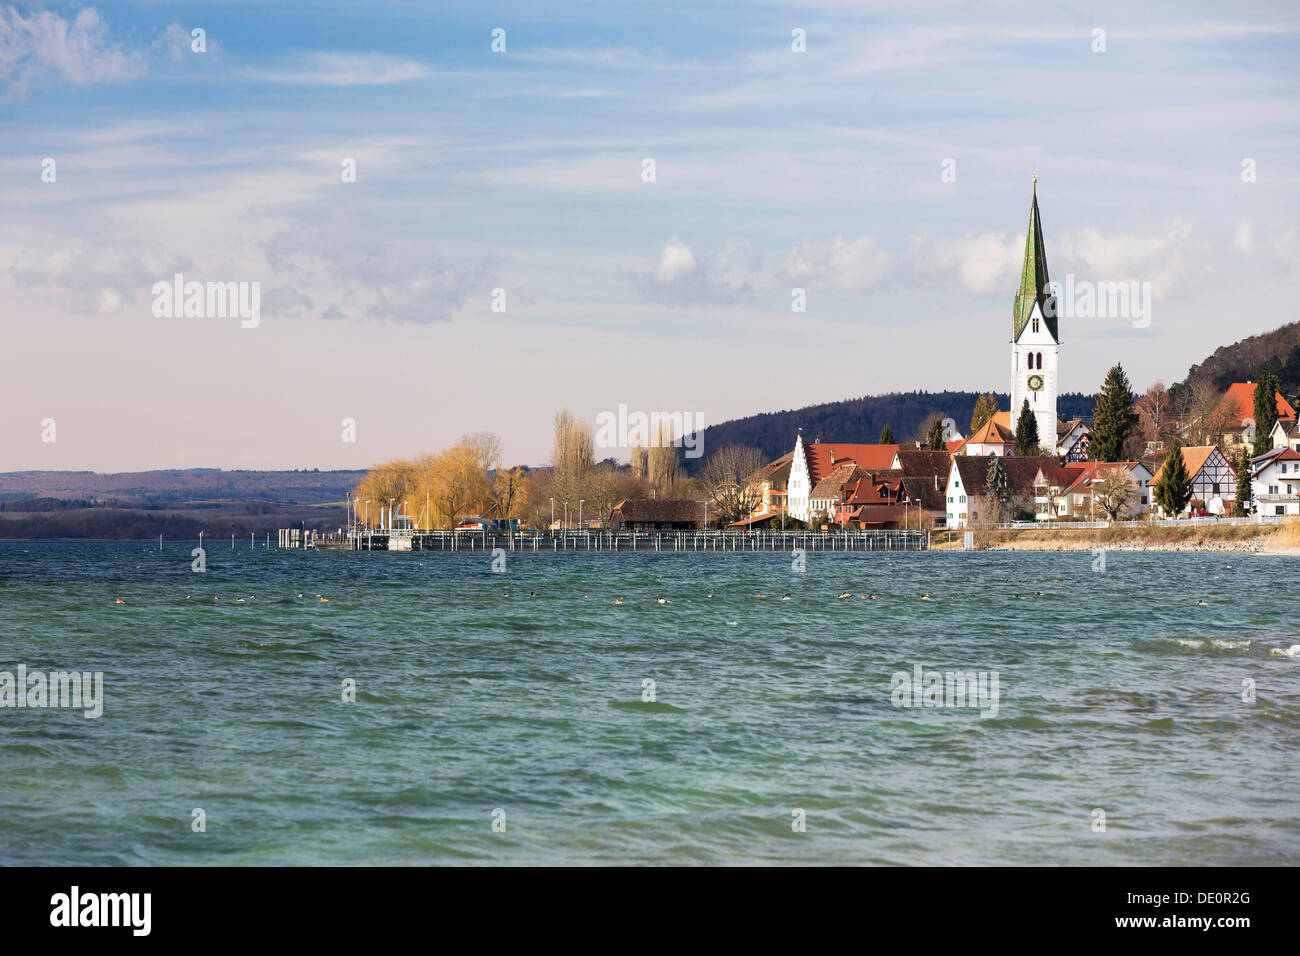 Stormy weather on a winter's day at Sipplingen on Lake Constance Stock Photo